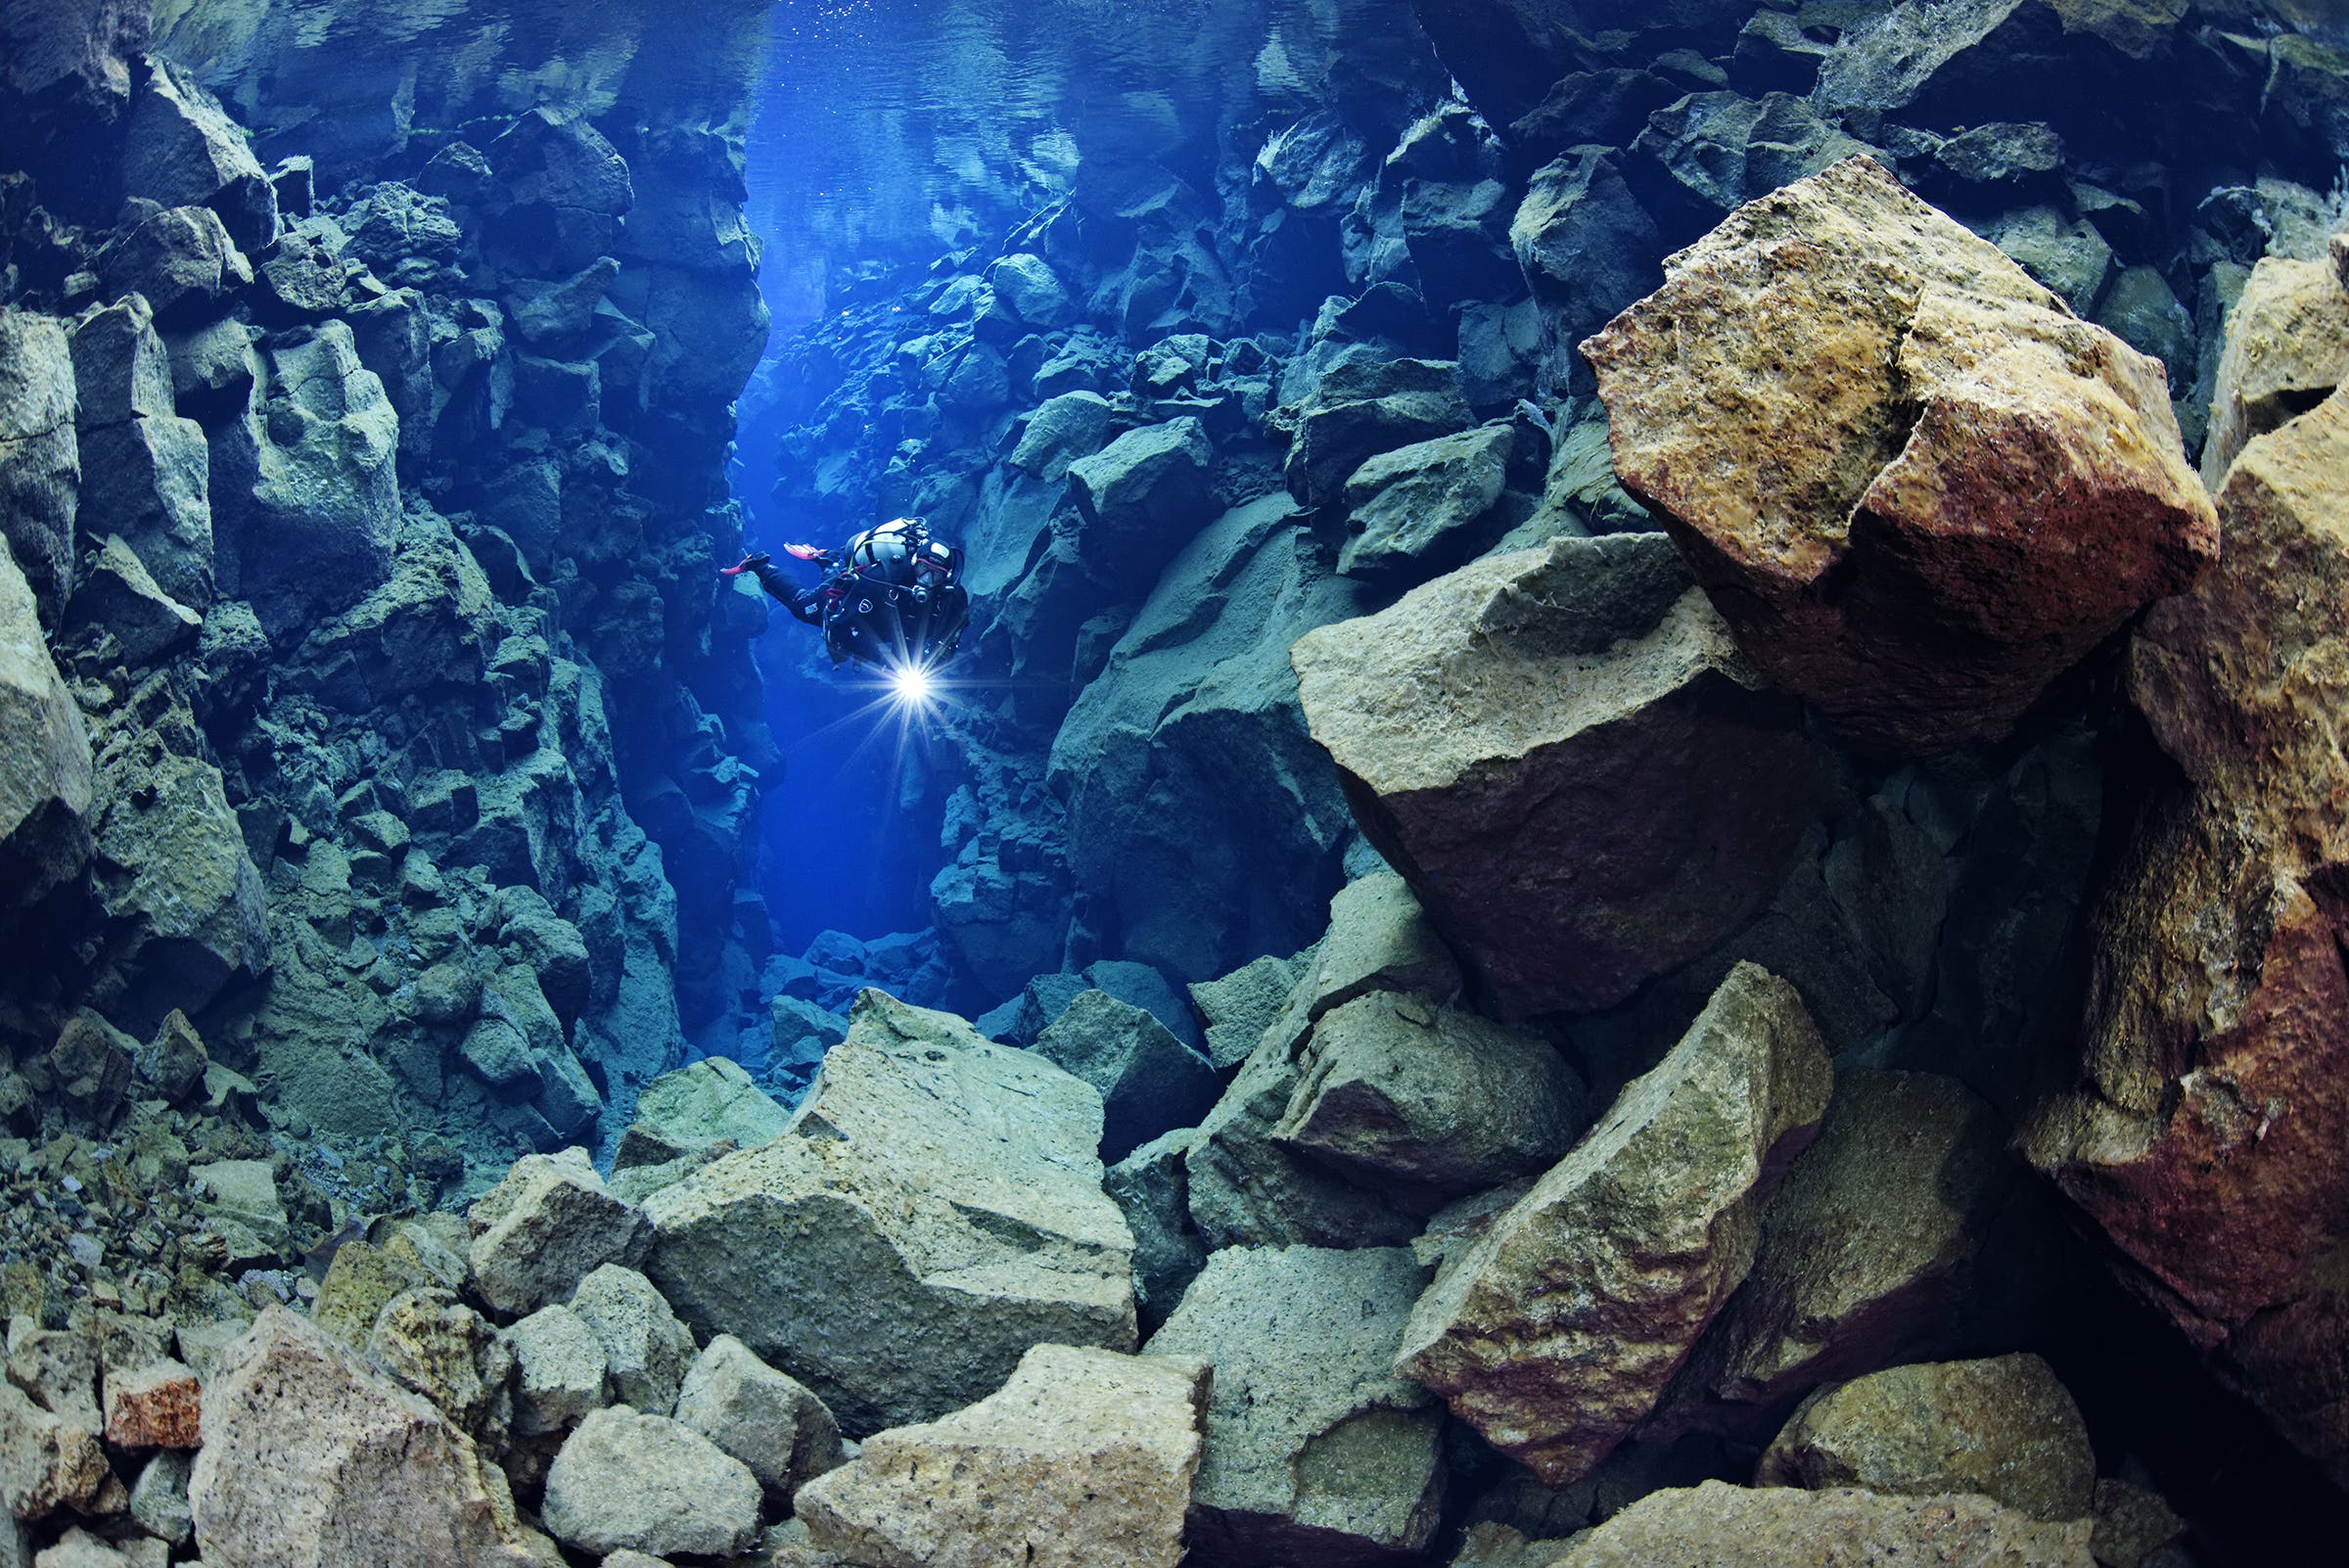 Diving in the Silfra fissure is a once in a lifetime opportunity.